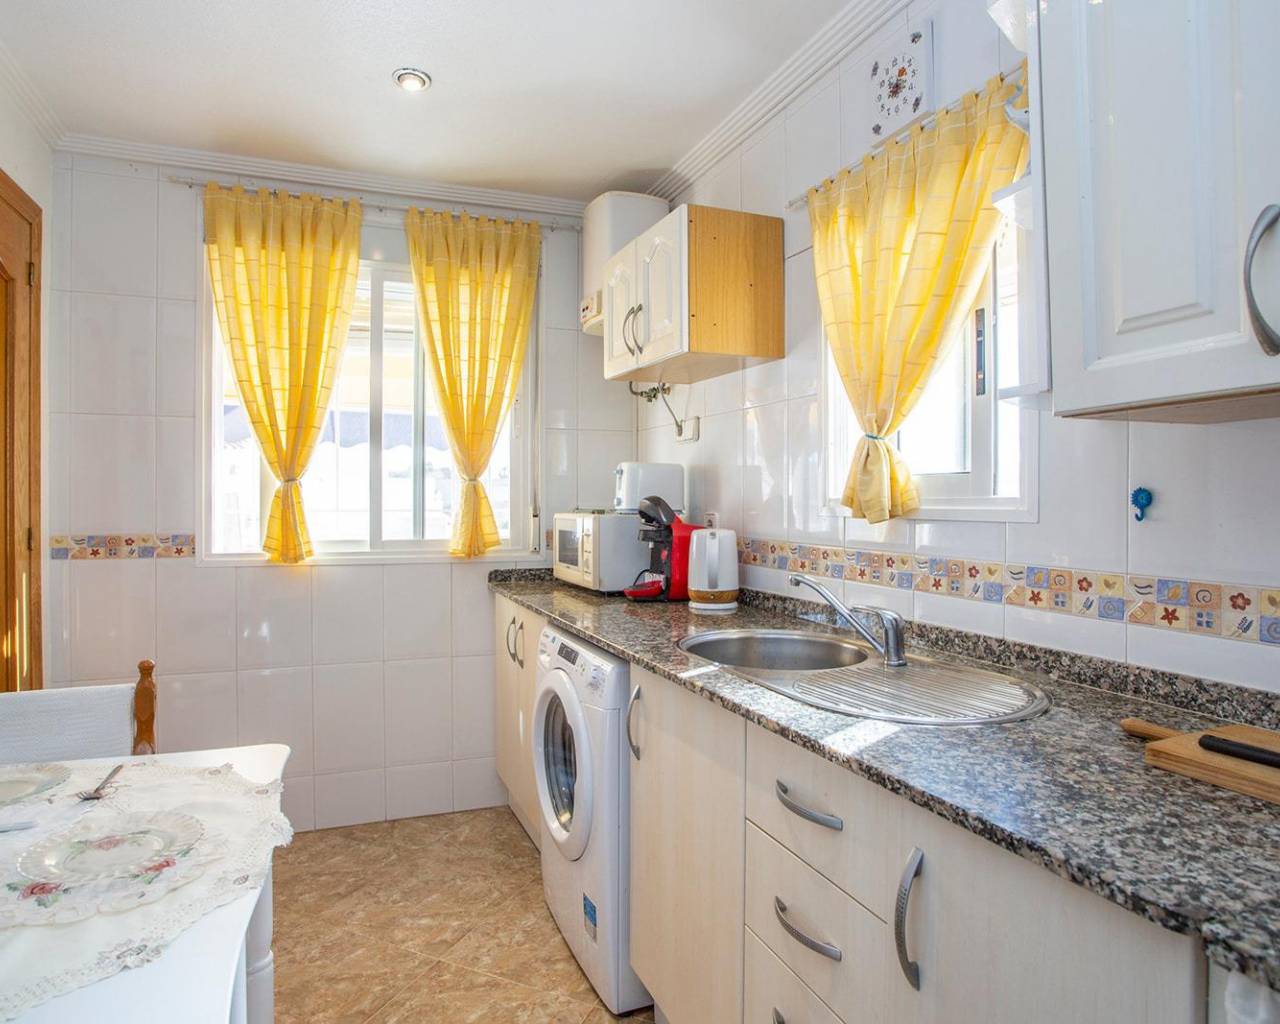 Sale - Terraced house - Torrevieja - Carrefour